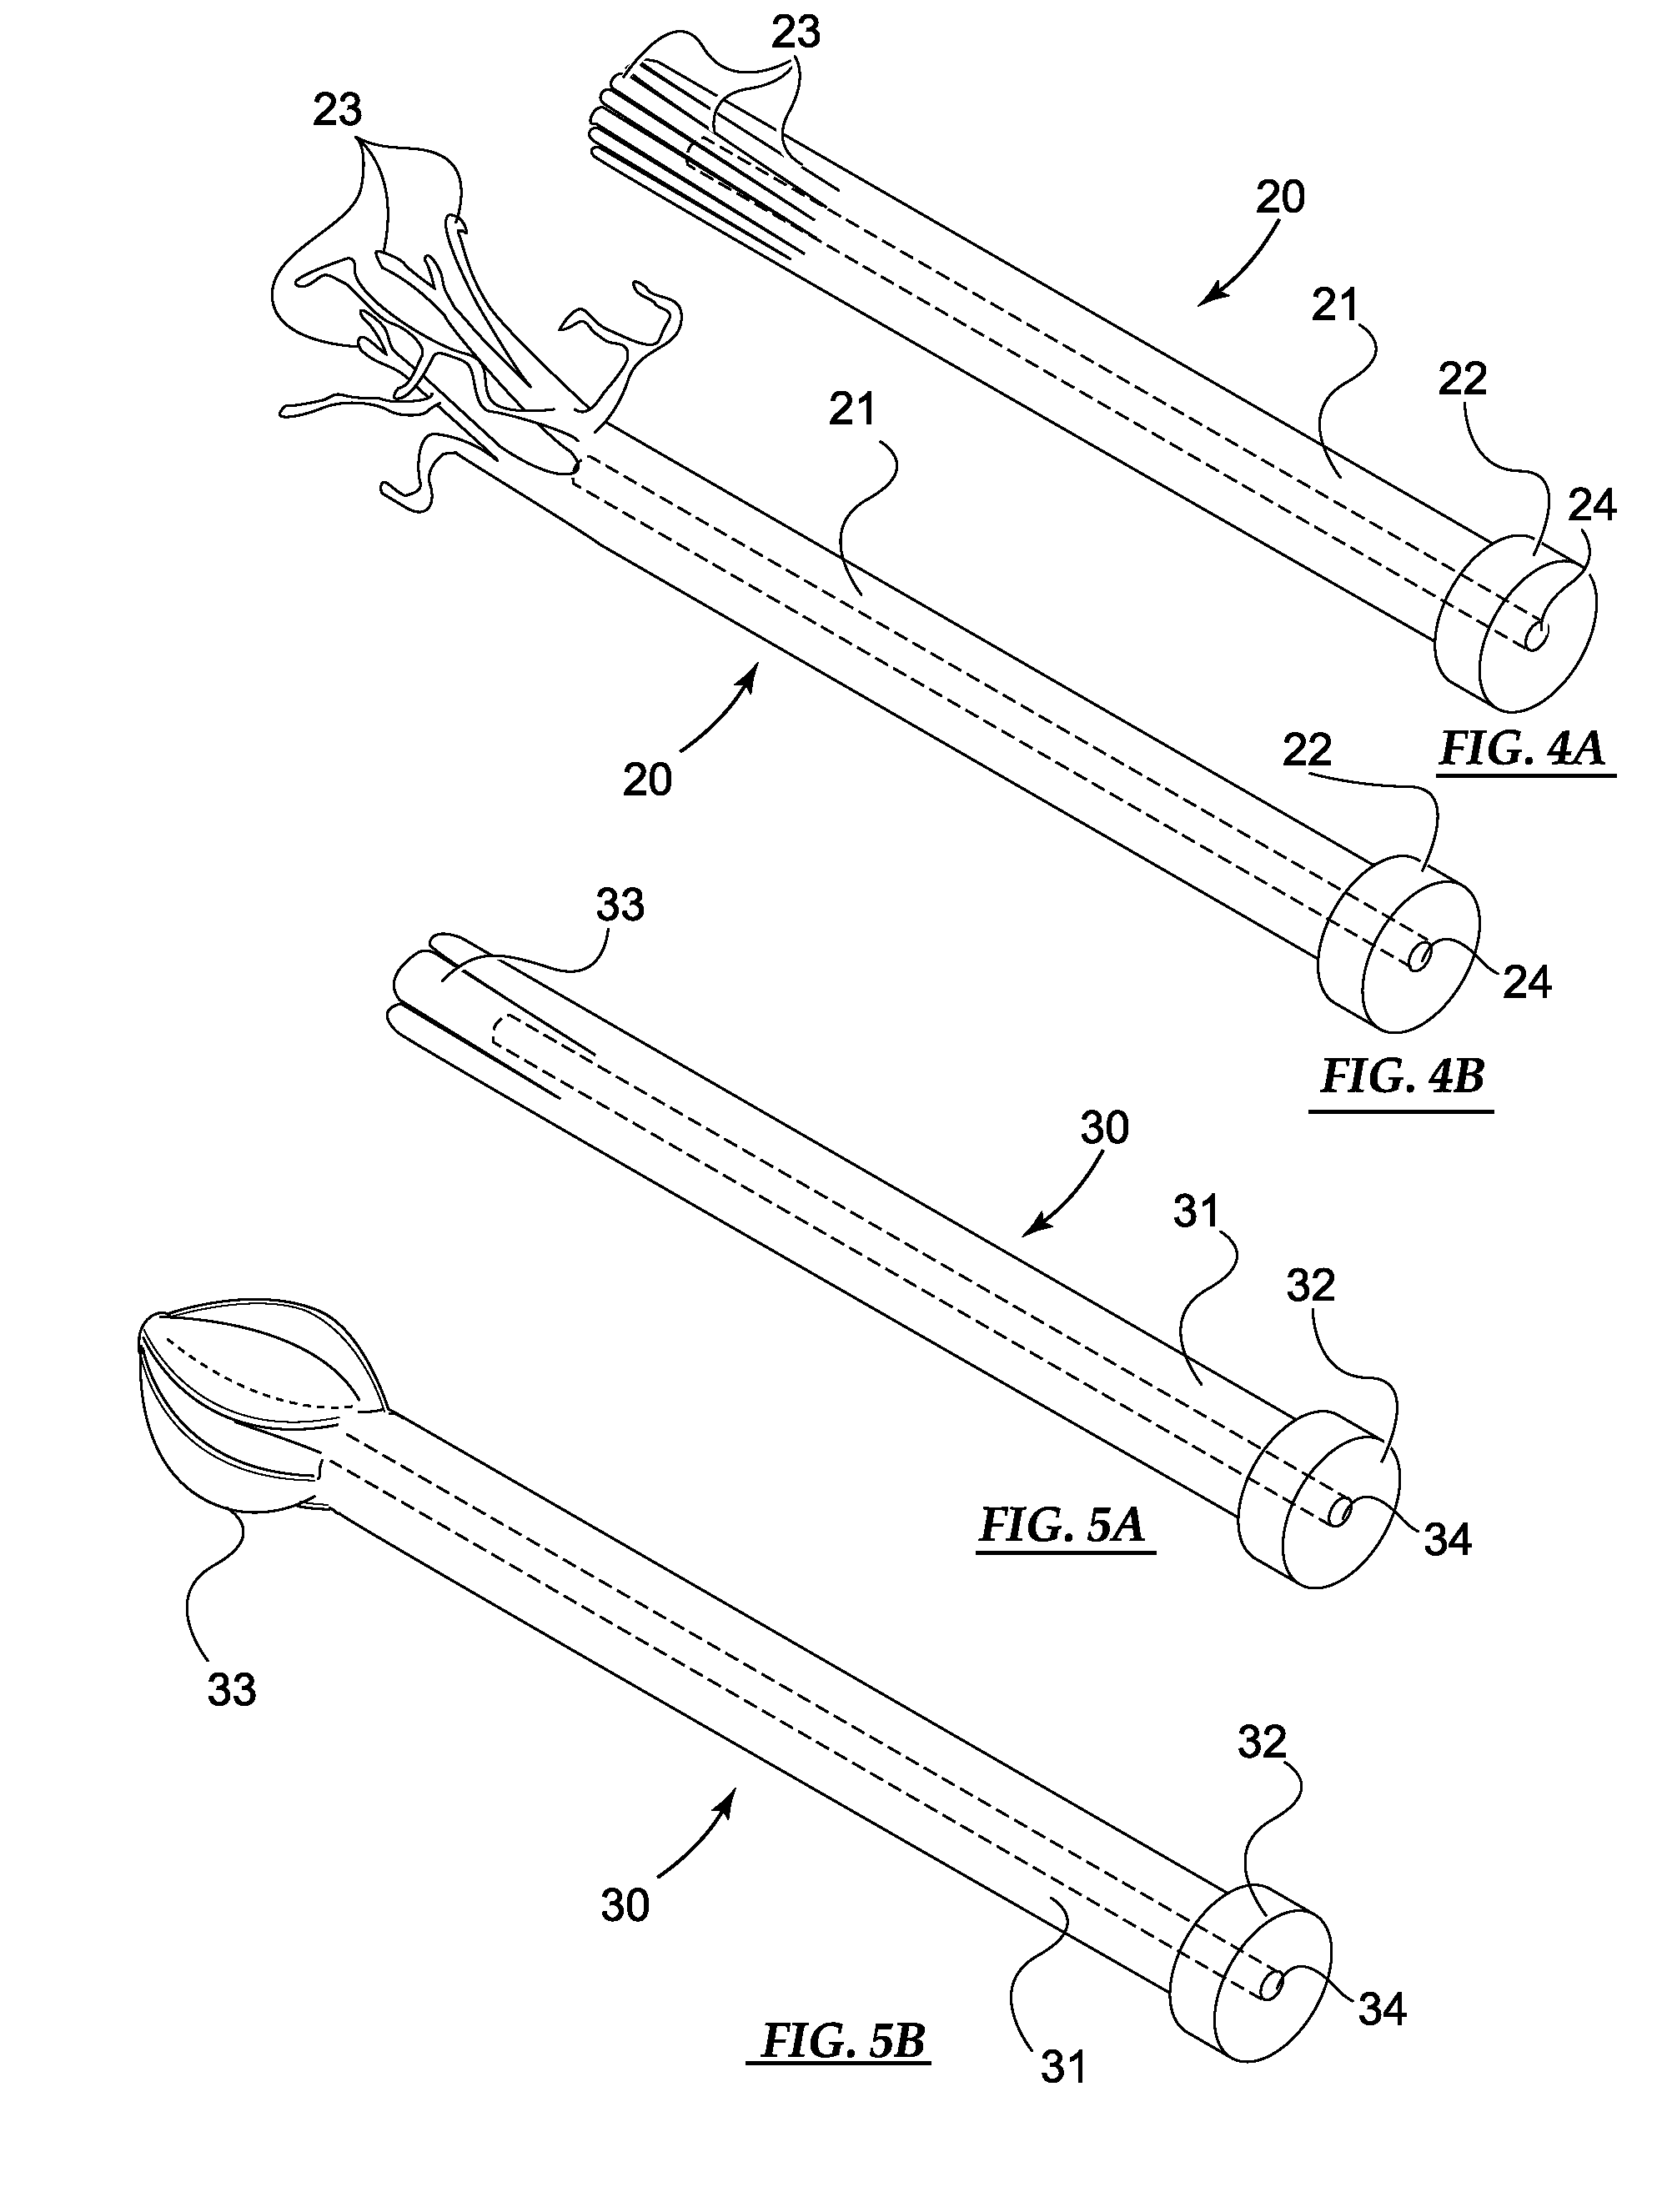 Device and method for orthopedic fracture fixation